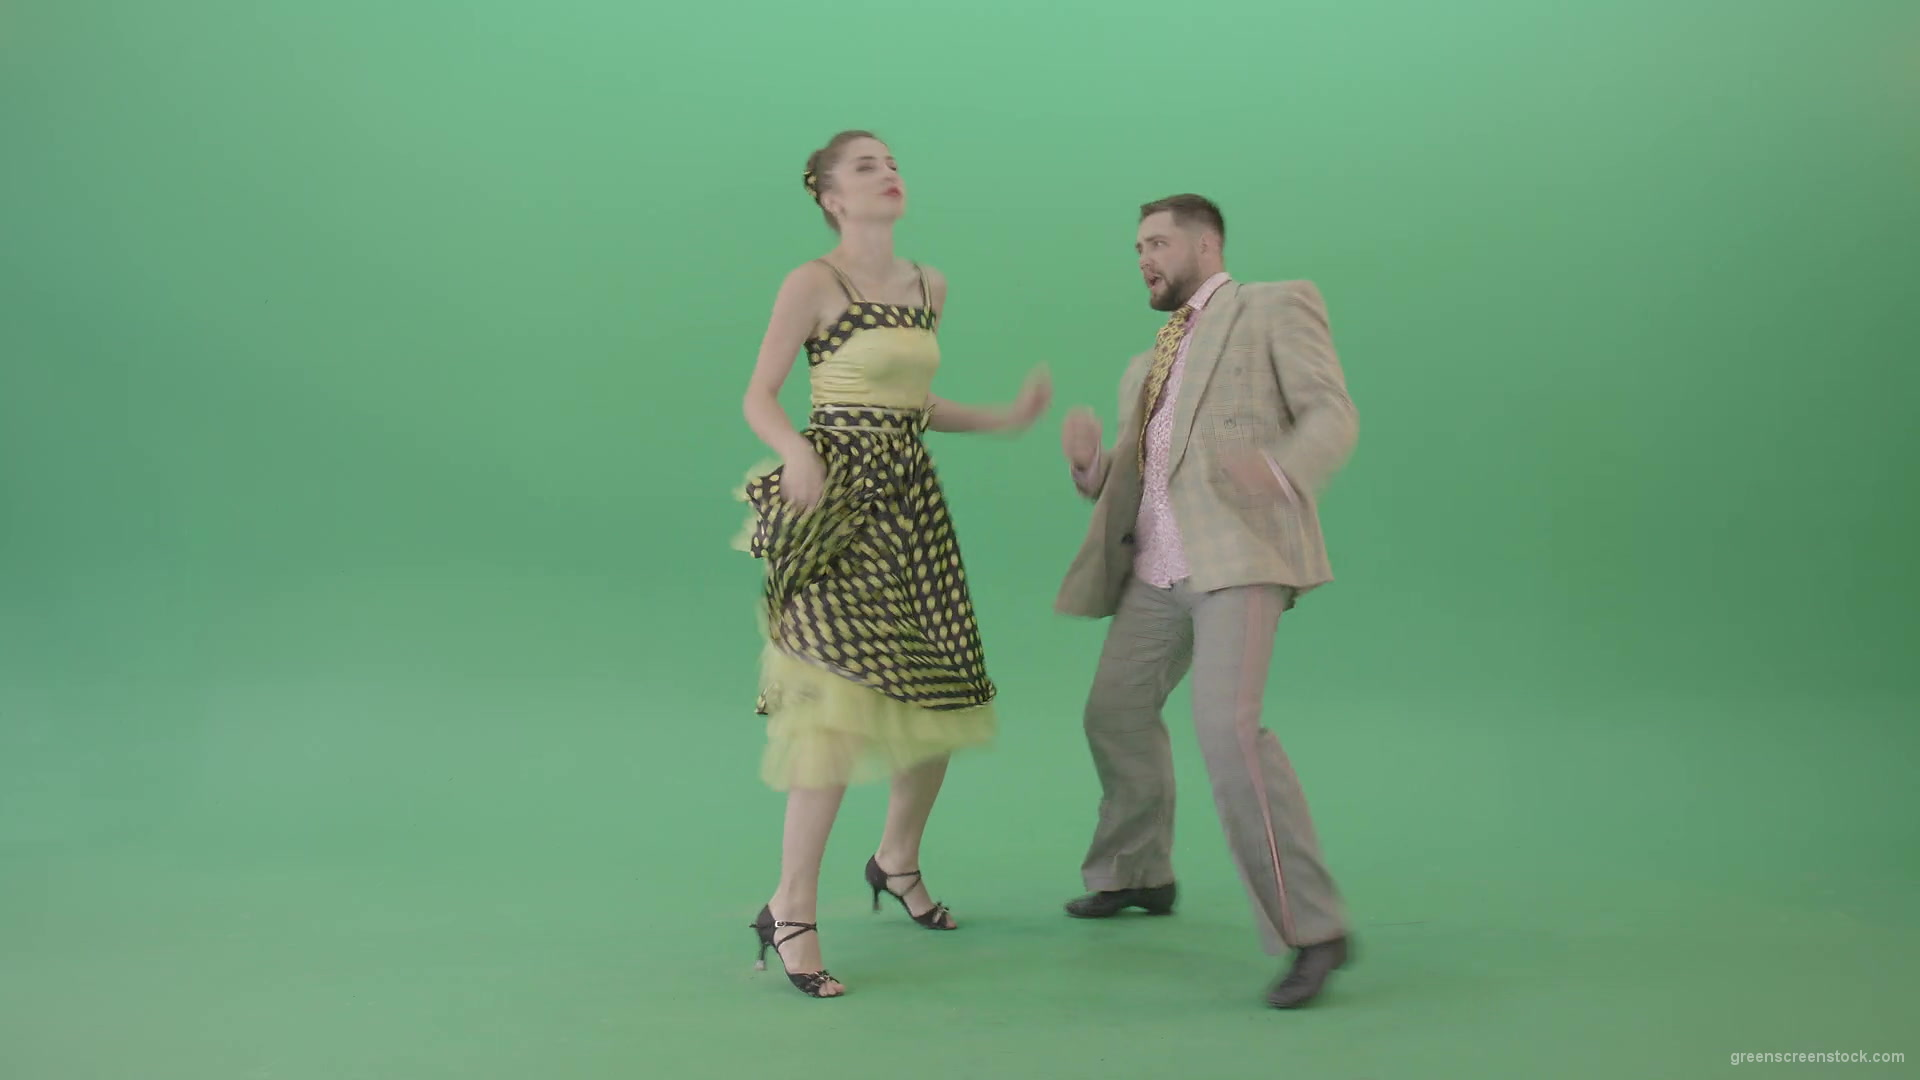 Boy-and-Girl-dancing-Boogie-woogie-and-rockandroll-isolated-on-Green-Screen-4K-Video-Footage-1920_007 Green Screen Stock